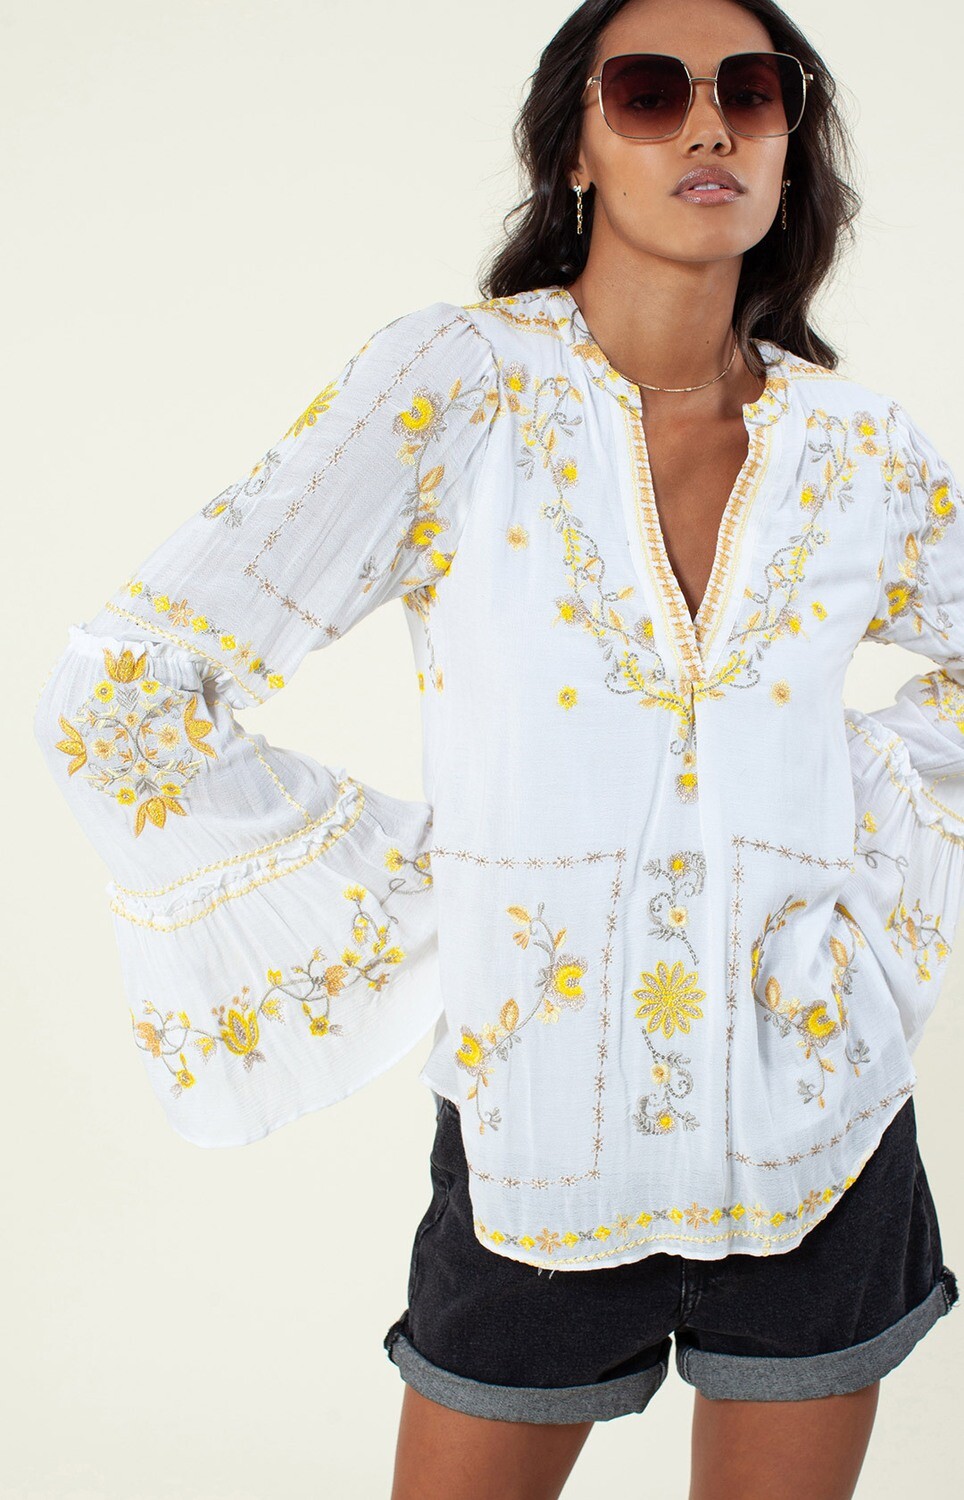 Hale Bob Aylin Embroidered Yellow Flower Top